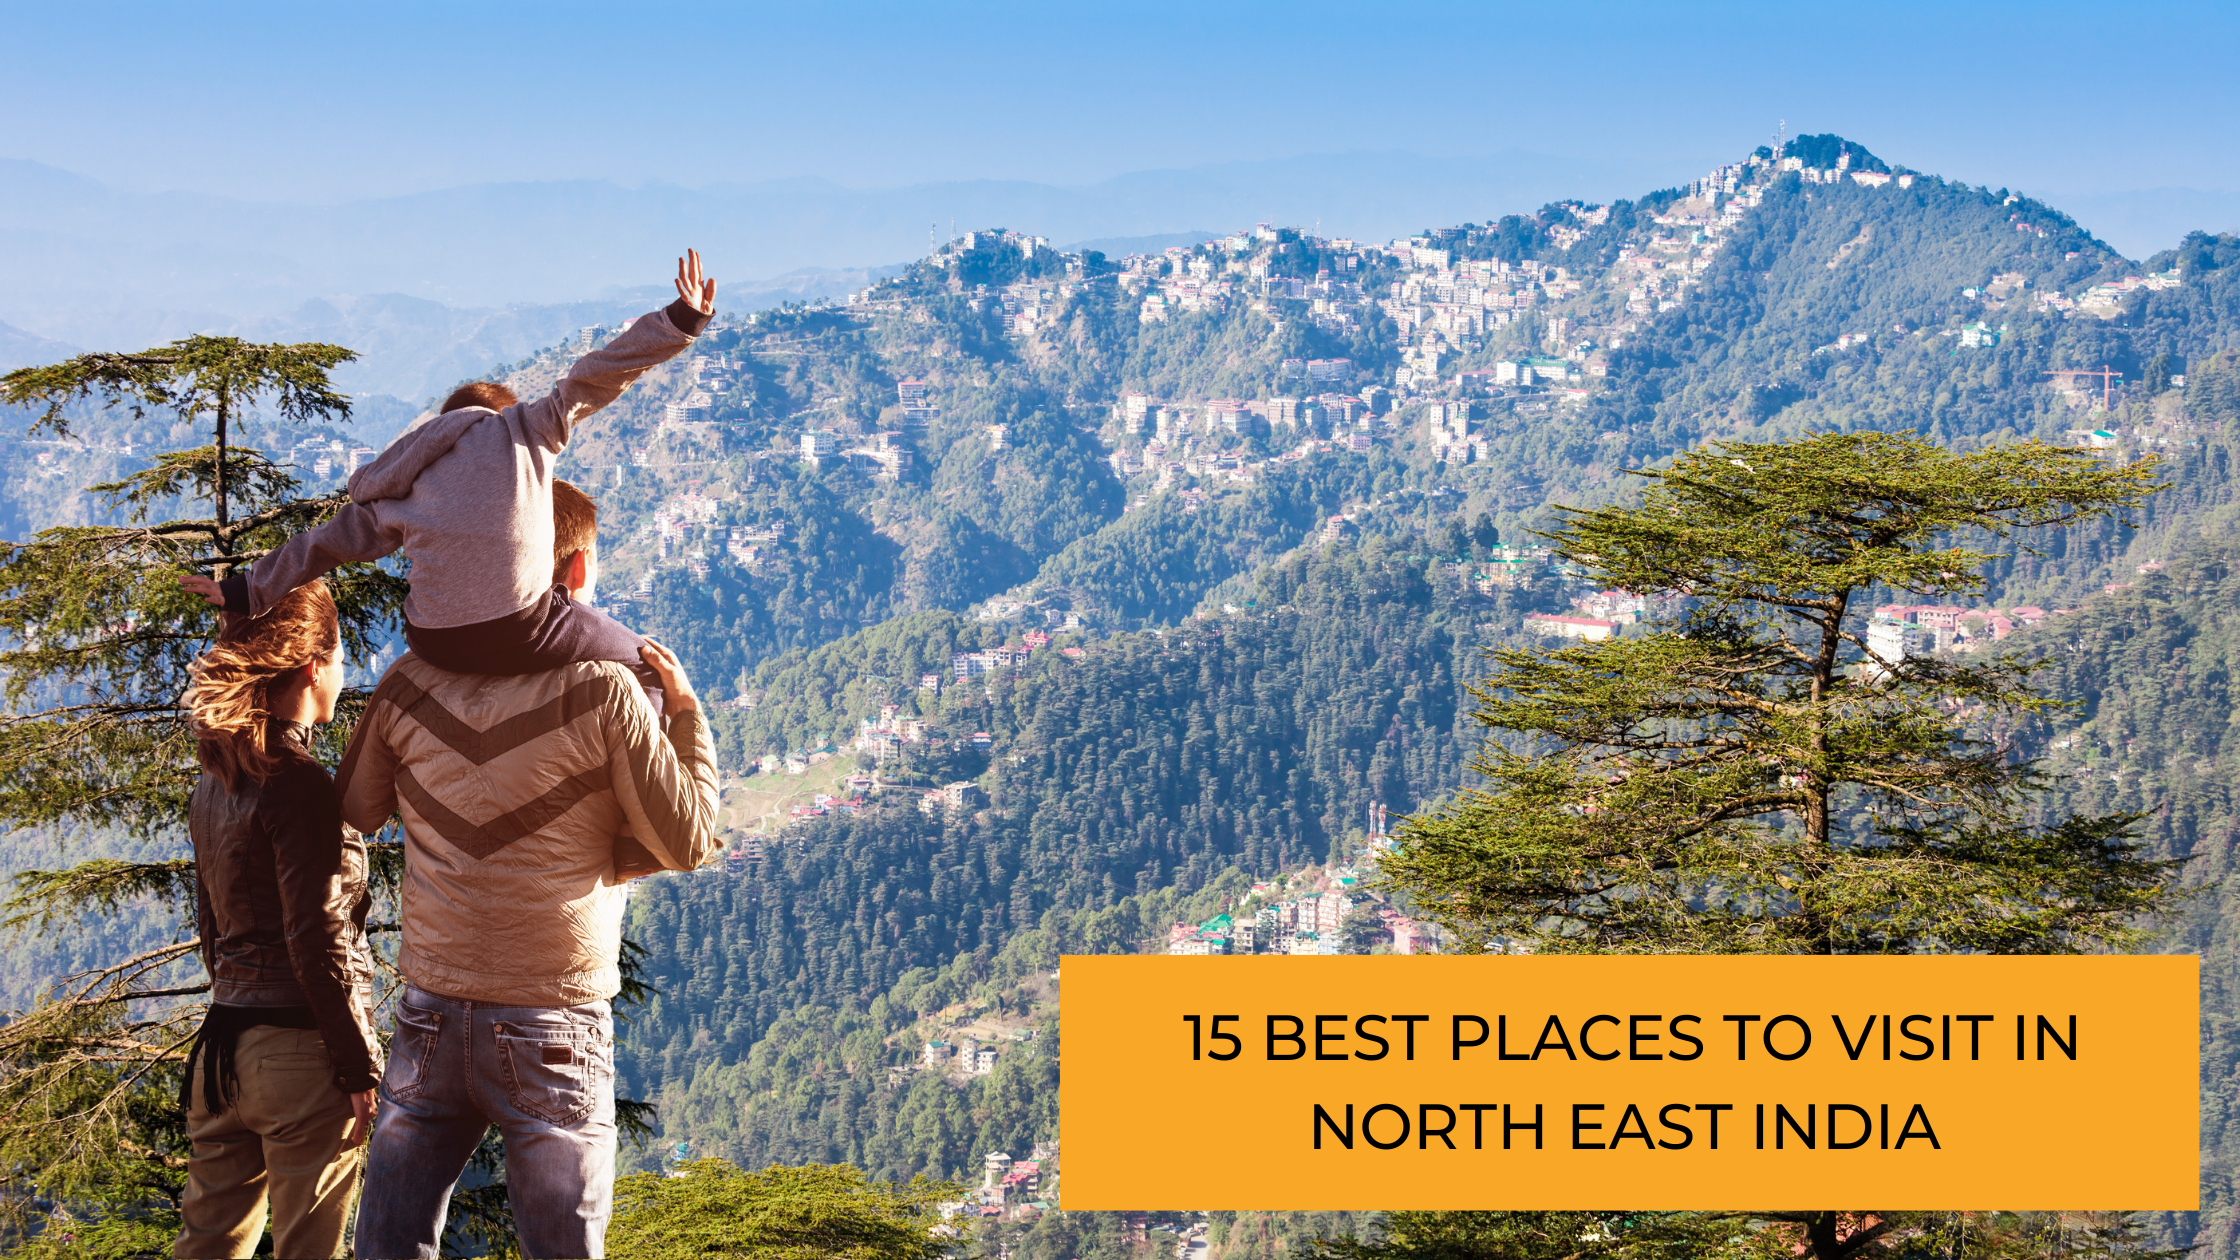 15 Best Places To Visit in North East India for a Splendid Getaway